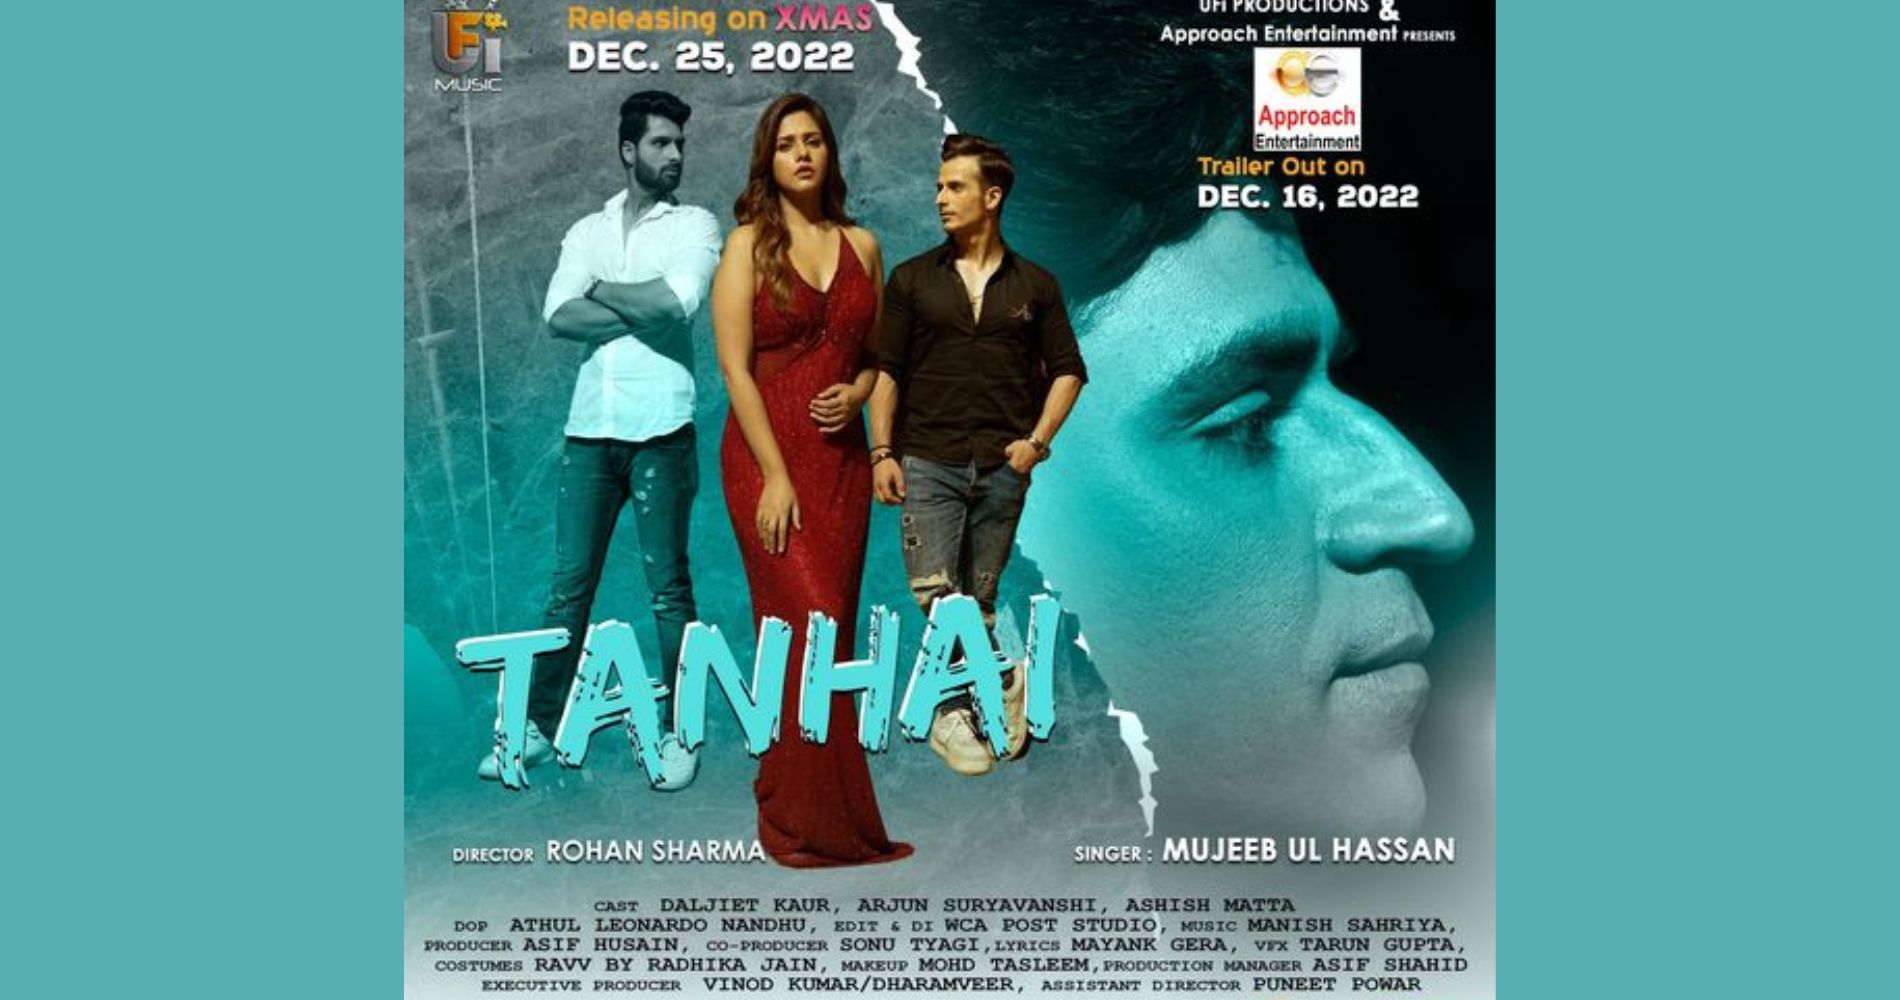 UFi Productions & Approach Entertainment to release Singer Mujeeb Ul Hassan’s Single Music video Tanhai